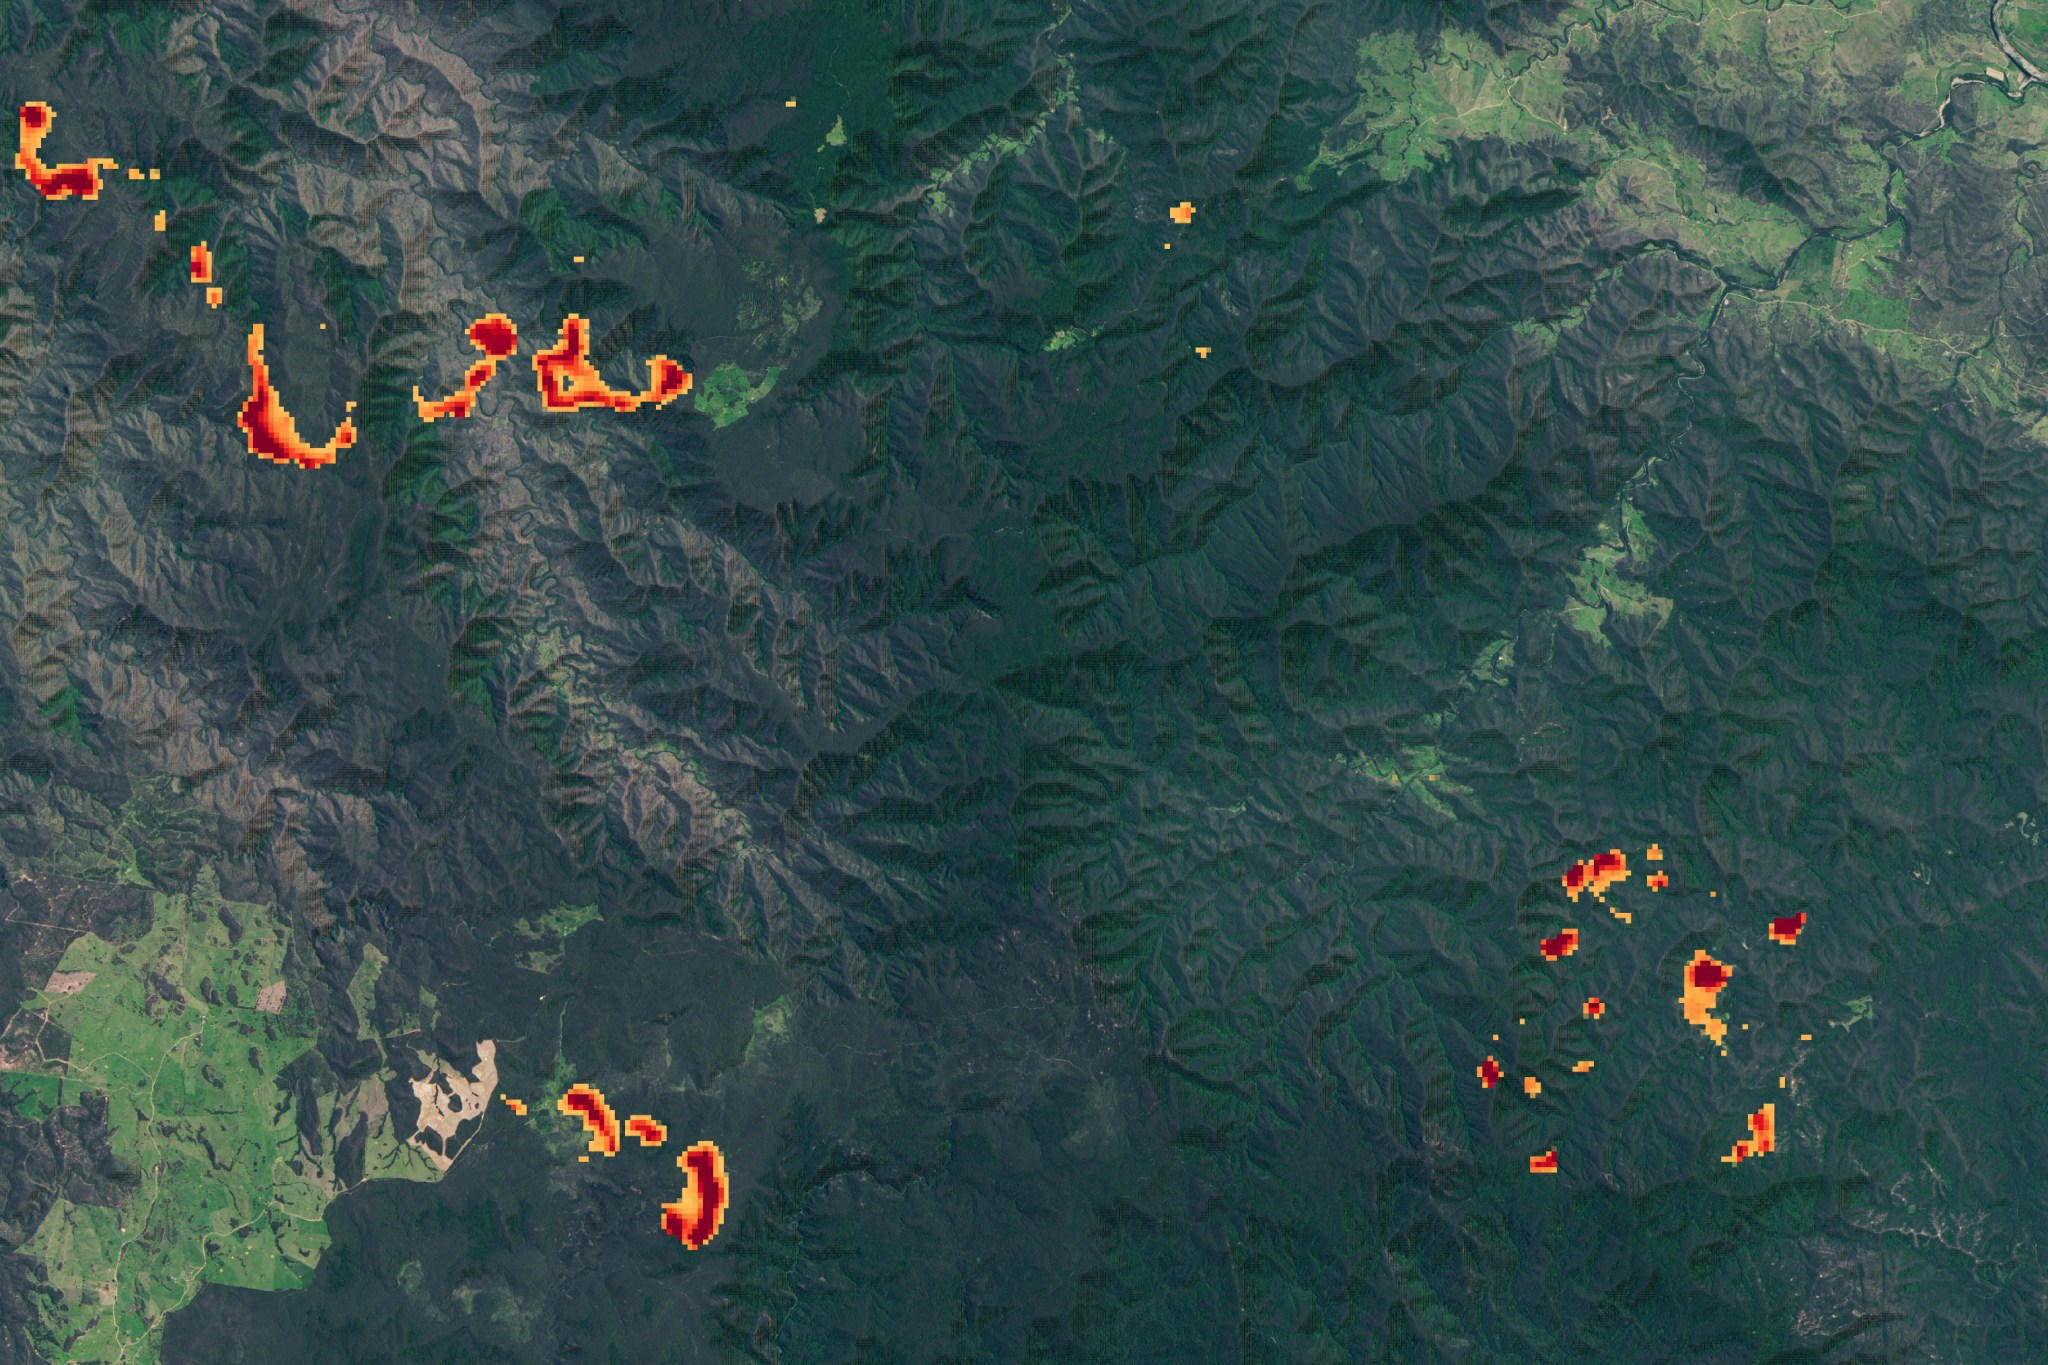 CTI captured several images of the unusually severe fires in Australia that burned for four months in 2019-20. With its 80-meter